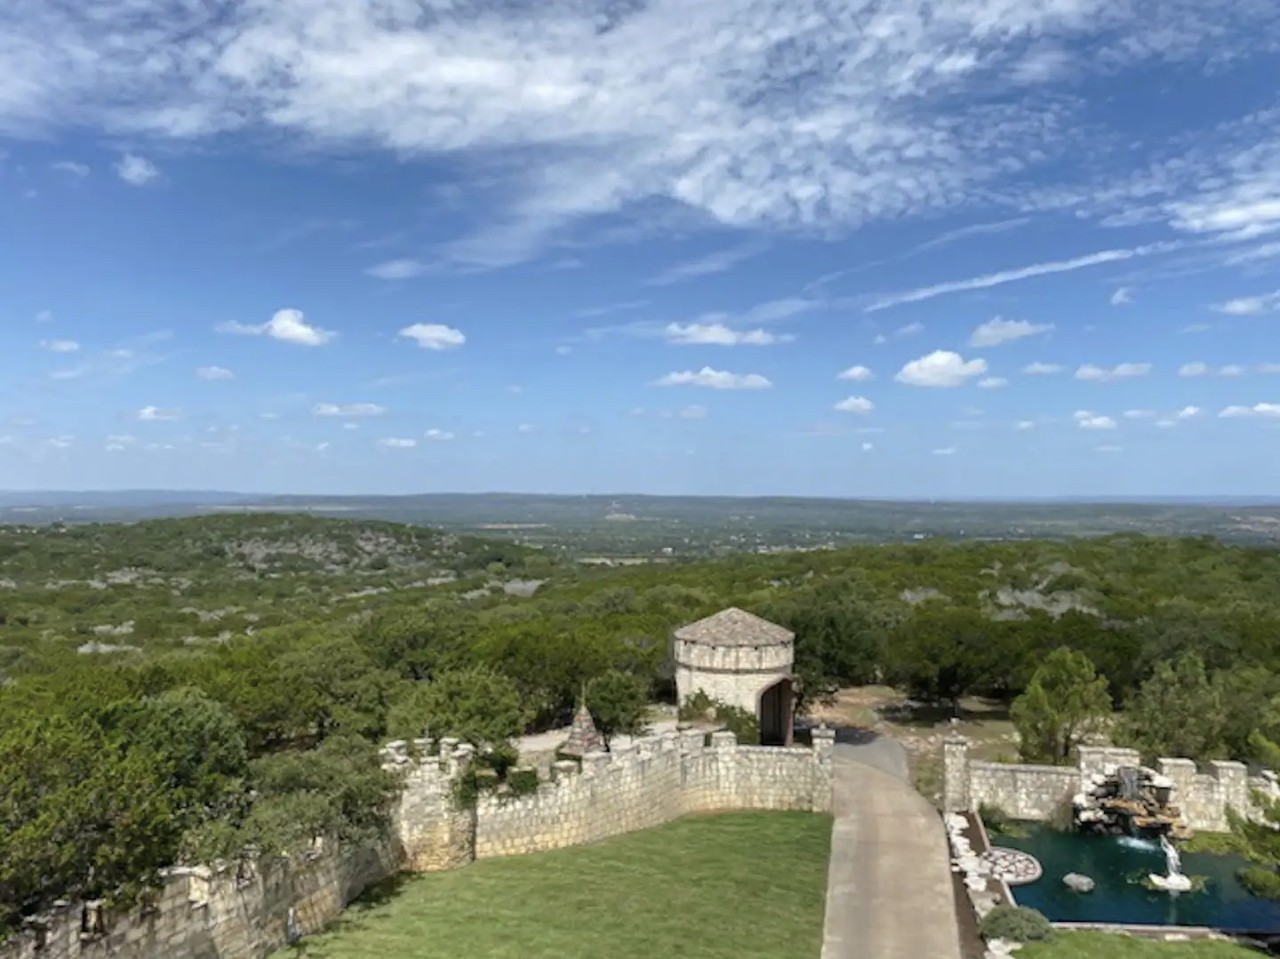 15 beautiful Texas Airbnbs perfect for a weekend getaway, including some near San Antonio